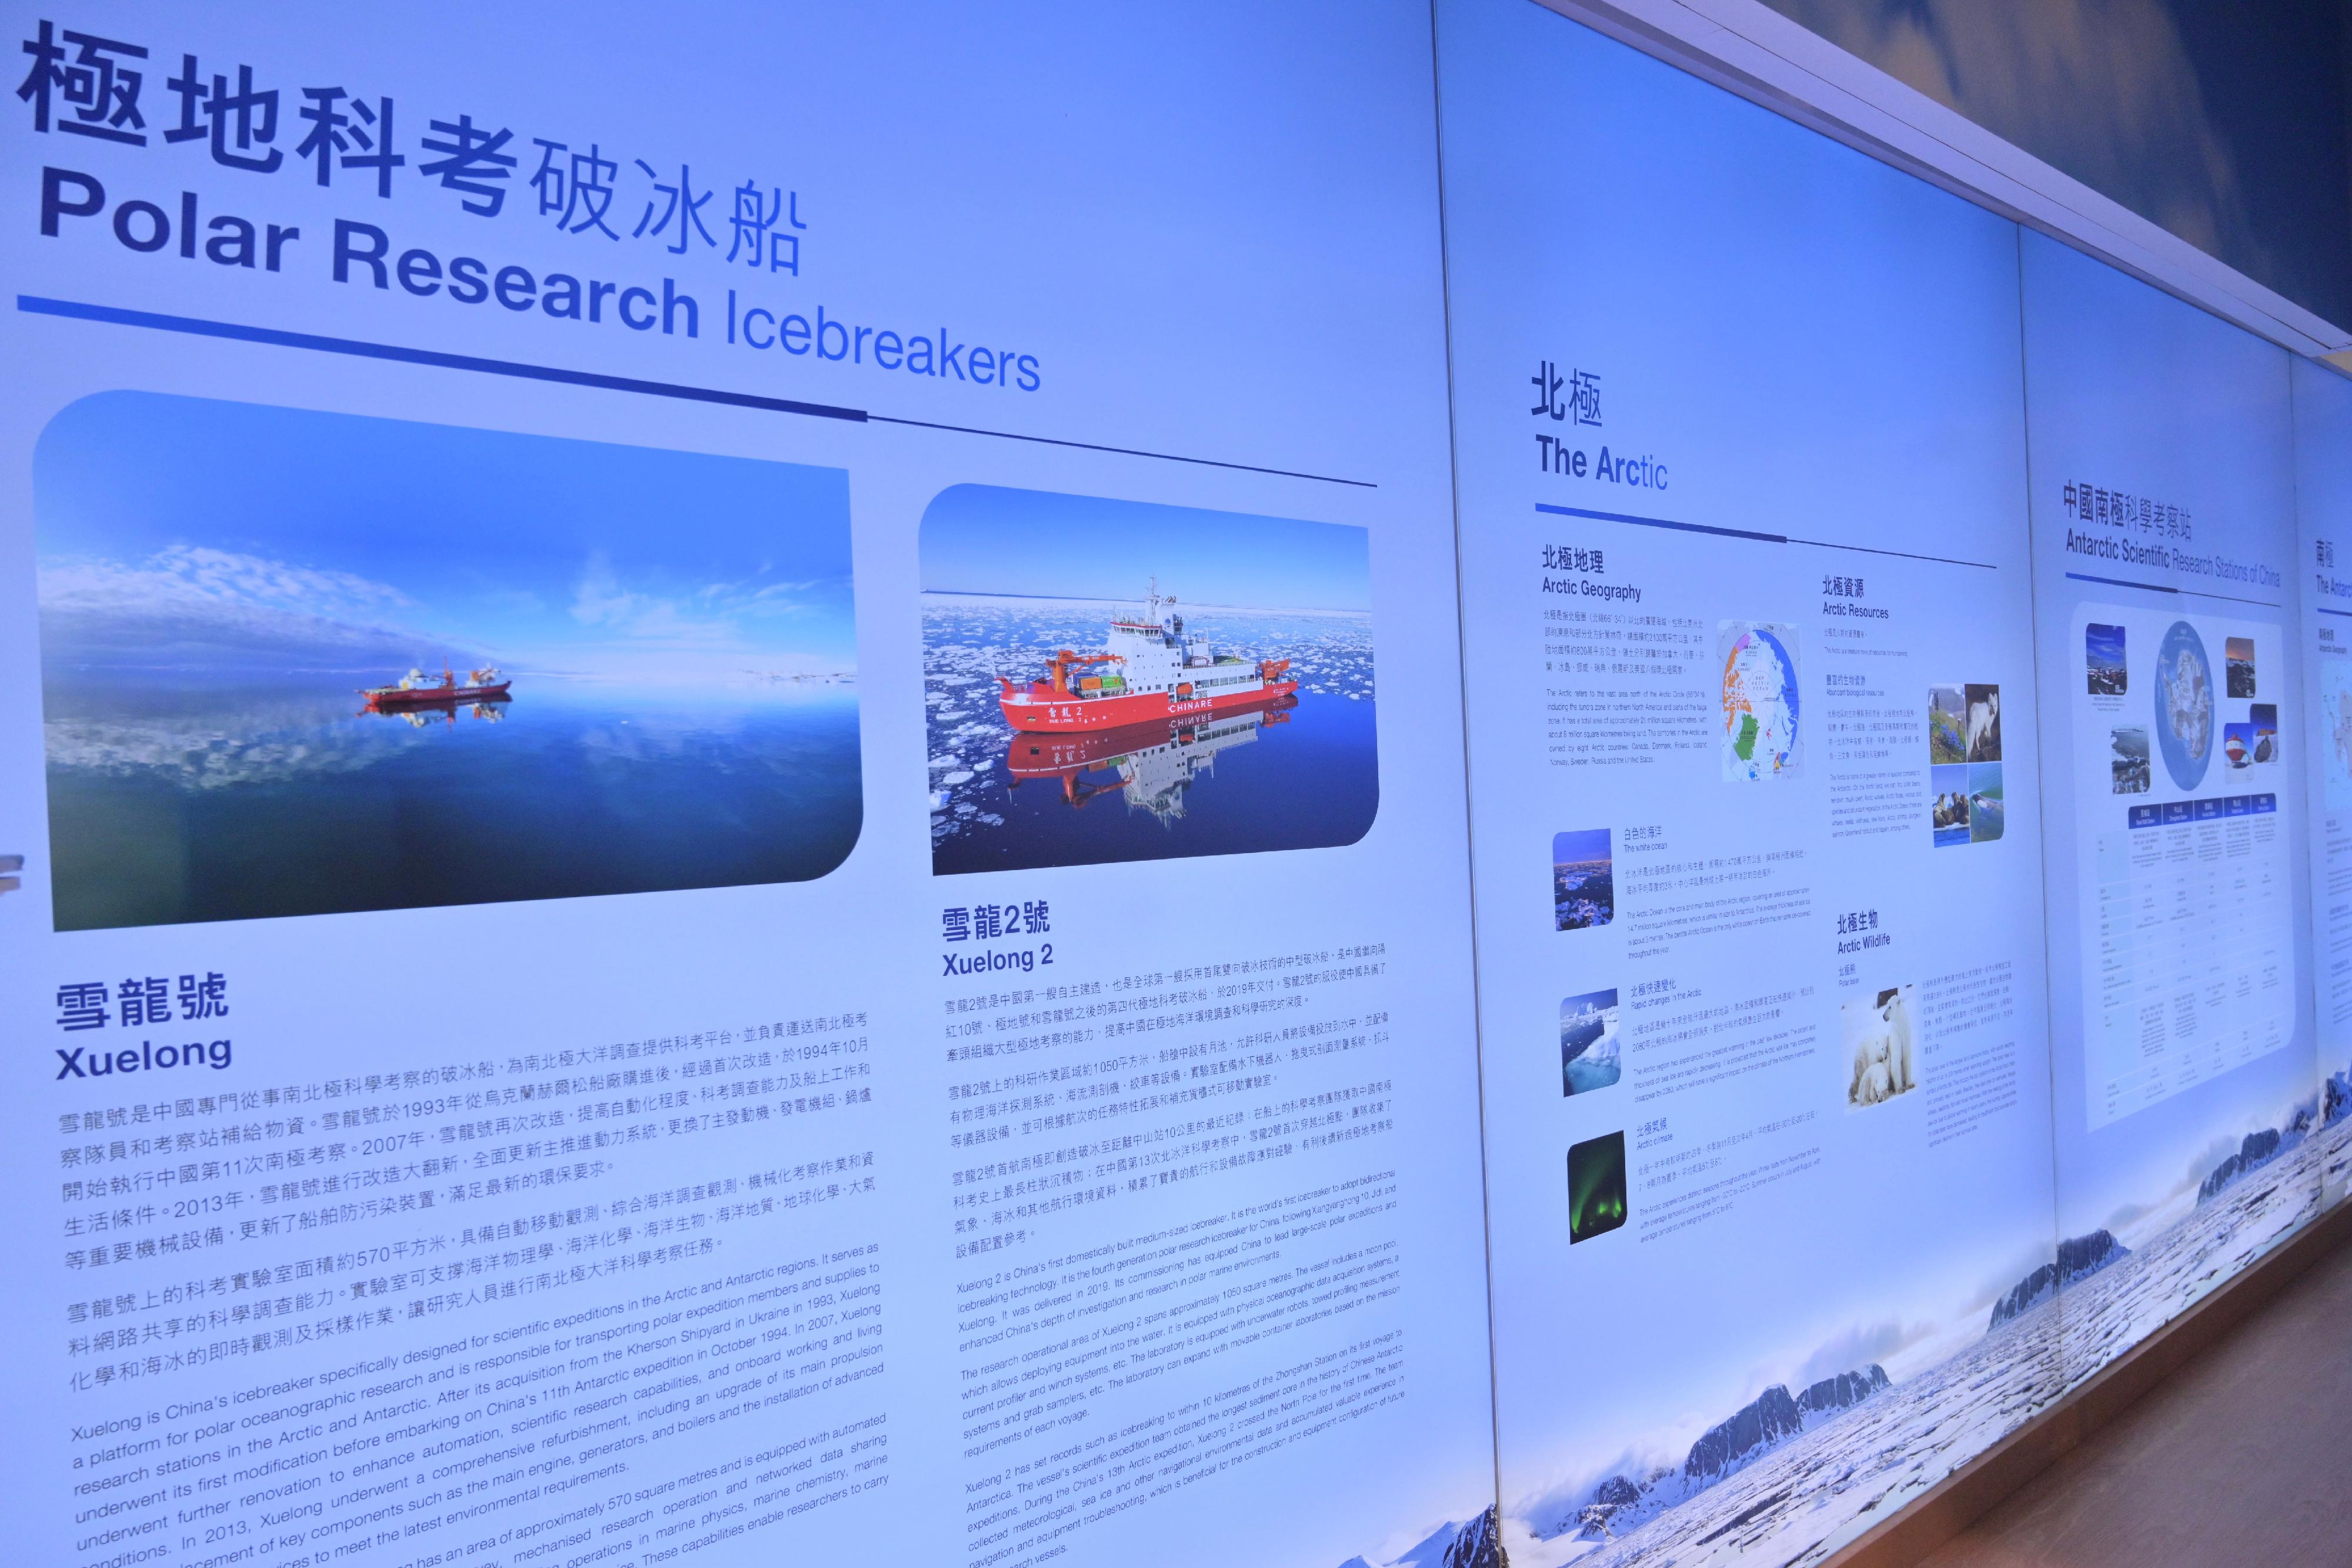 The Hong Kong Science Museum launched a new special exhibition, "Polar Research and Climate Change", today (March 18). Photo shows thematic panels introducing scientific observation and research stations in China.